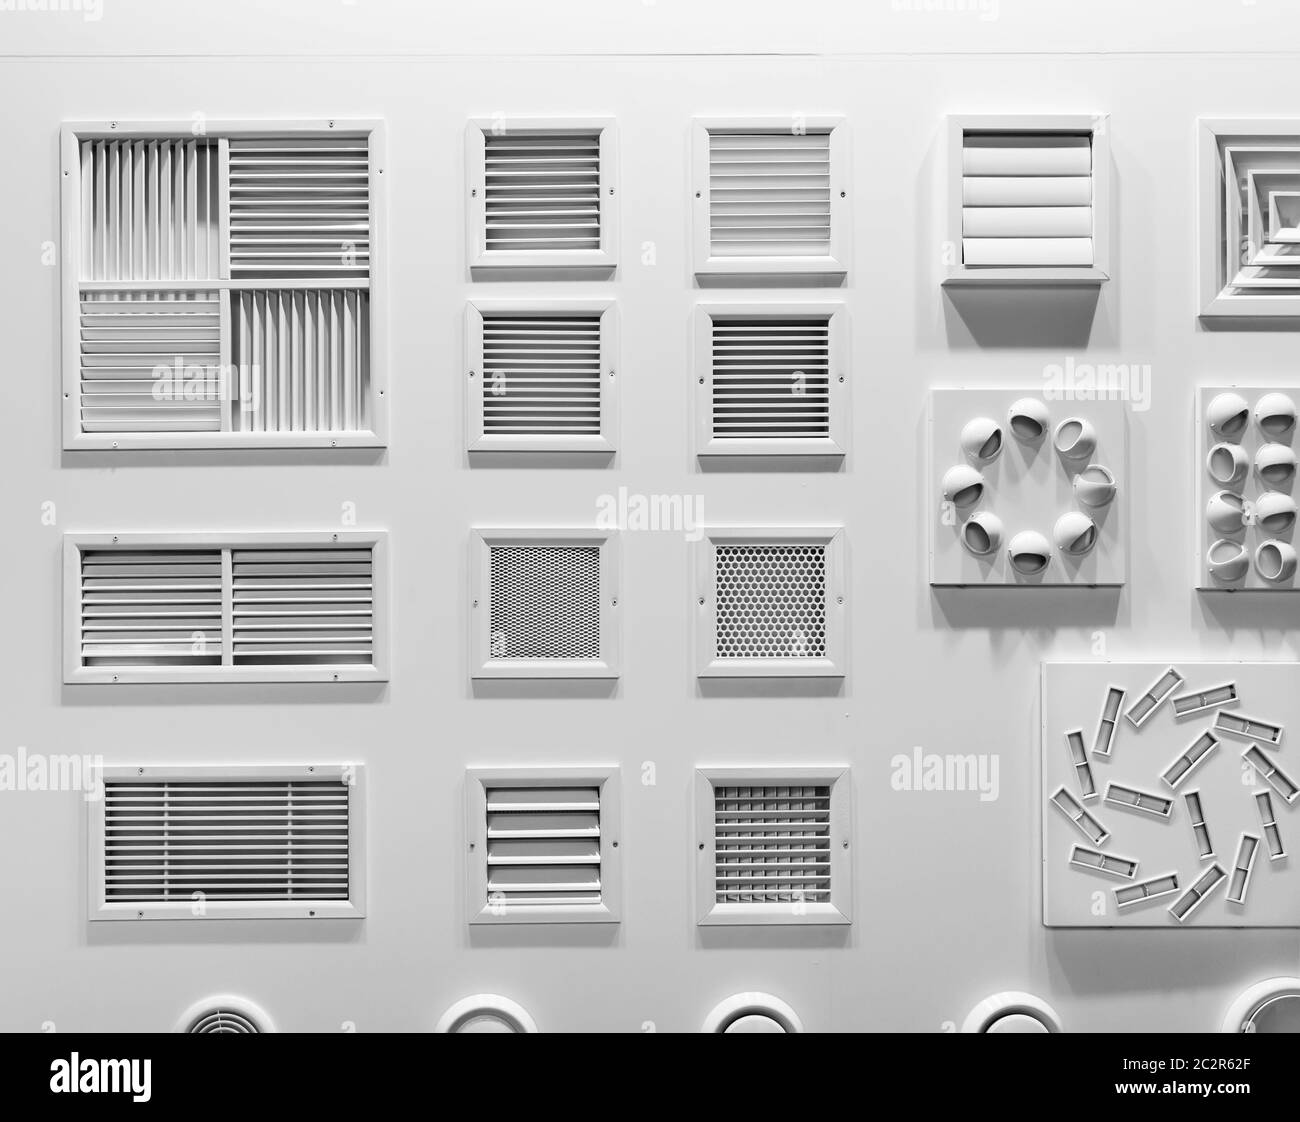 Showcase with plastic grills for house air vents closeup. Forced ventilation for bathroom, kitchen or rooms Stock Photo